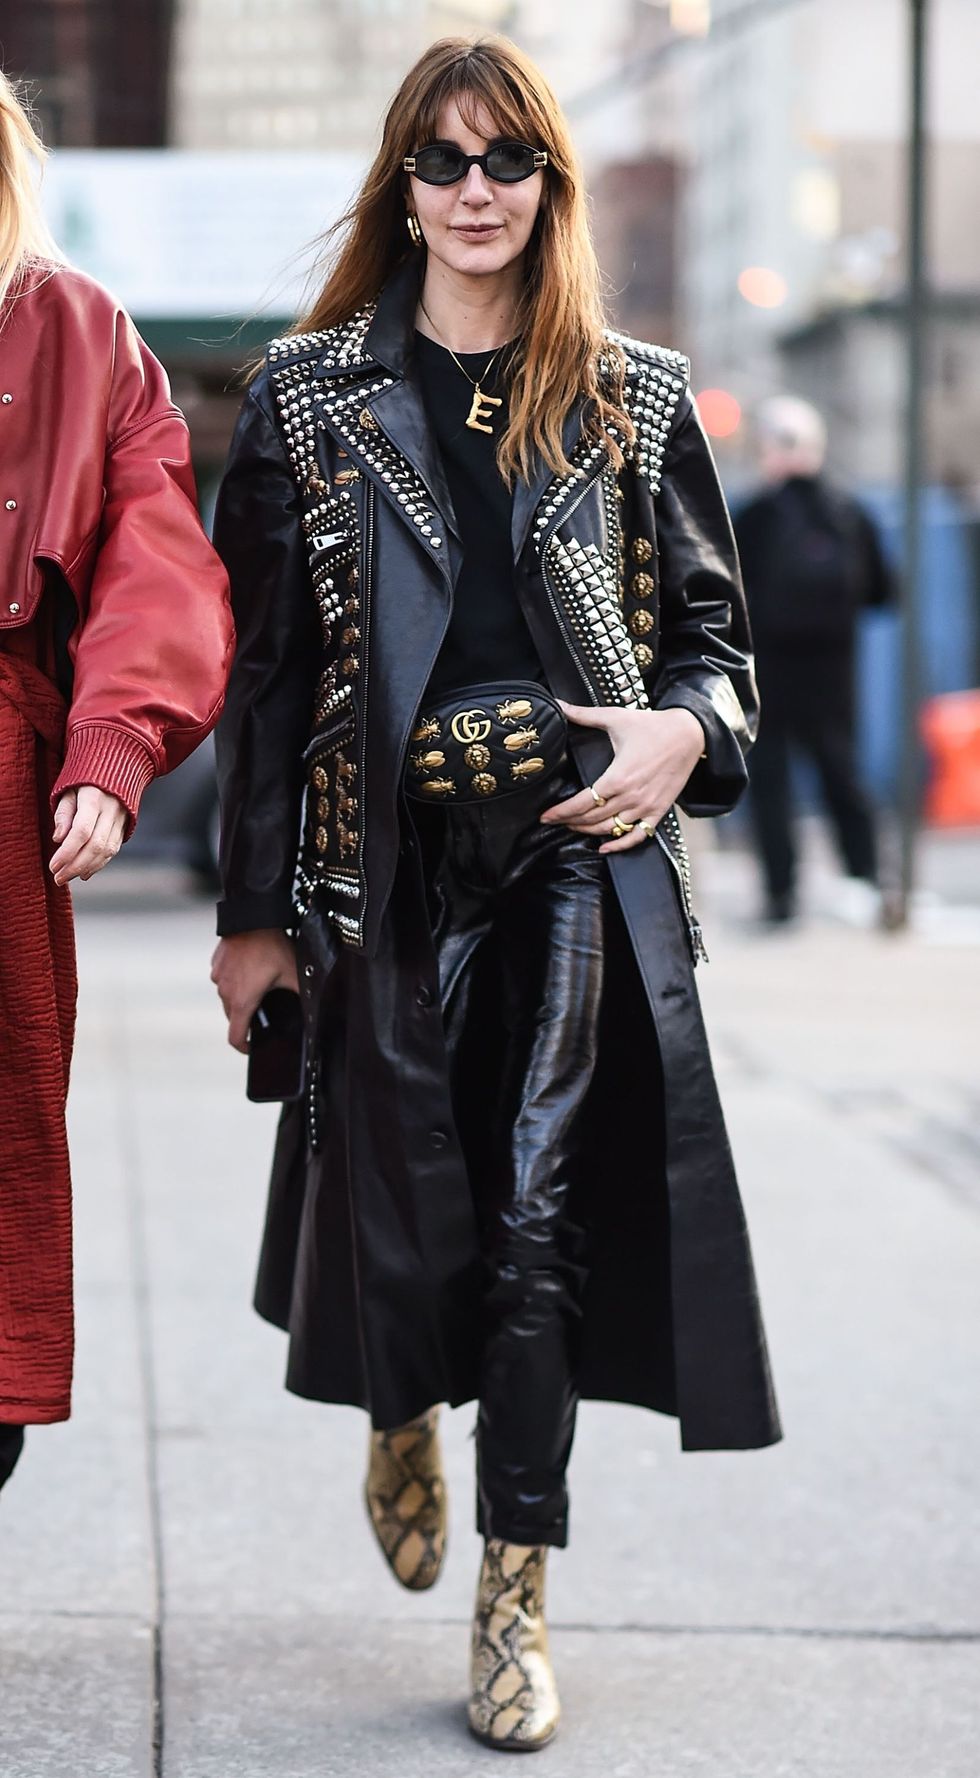 NEW YORK, NY - FEBRUARY 14:  Ece Sukan is seen wearing Gucci leather coat and bag outside the Esteban Cortazar show during New York Fashion Week: Women's A/W 2018 on February 14, 2018 in New York City.  (Photo by Daniel Zuchnik/Getty Images)